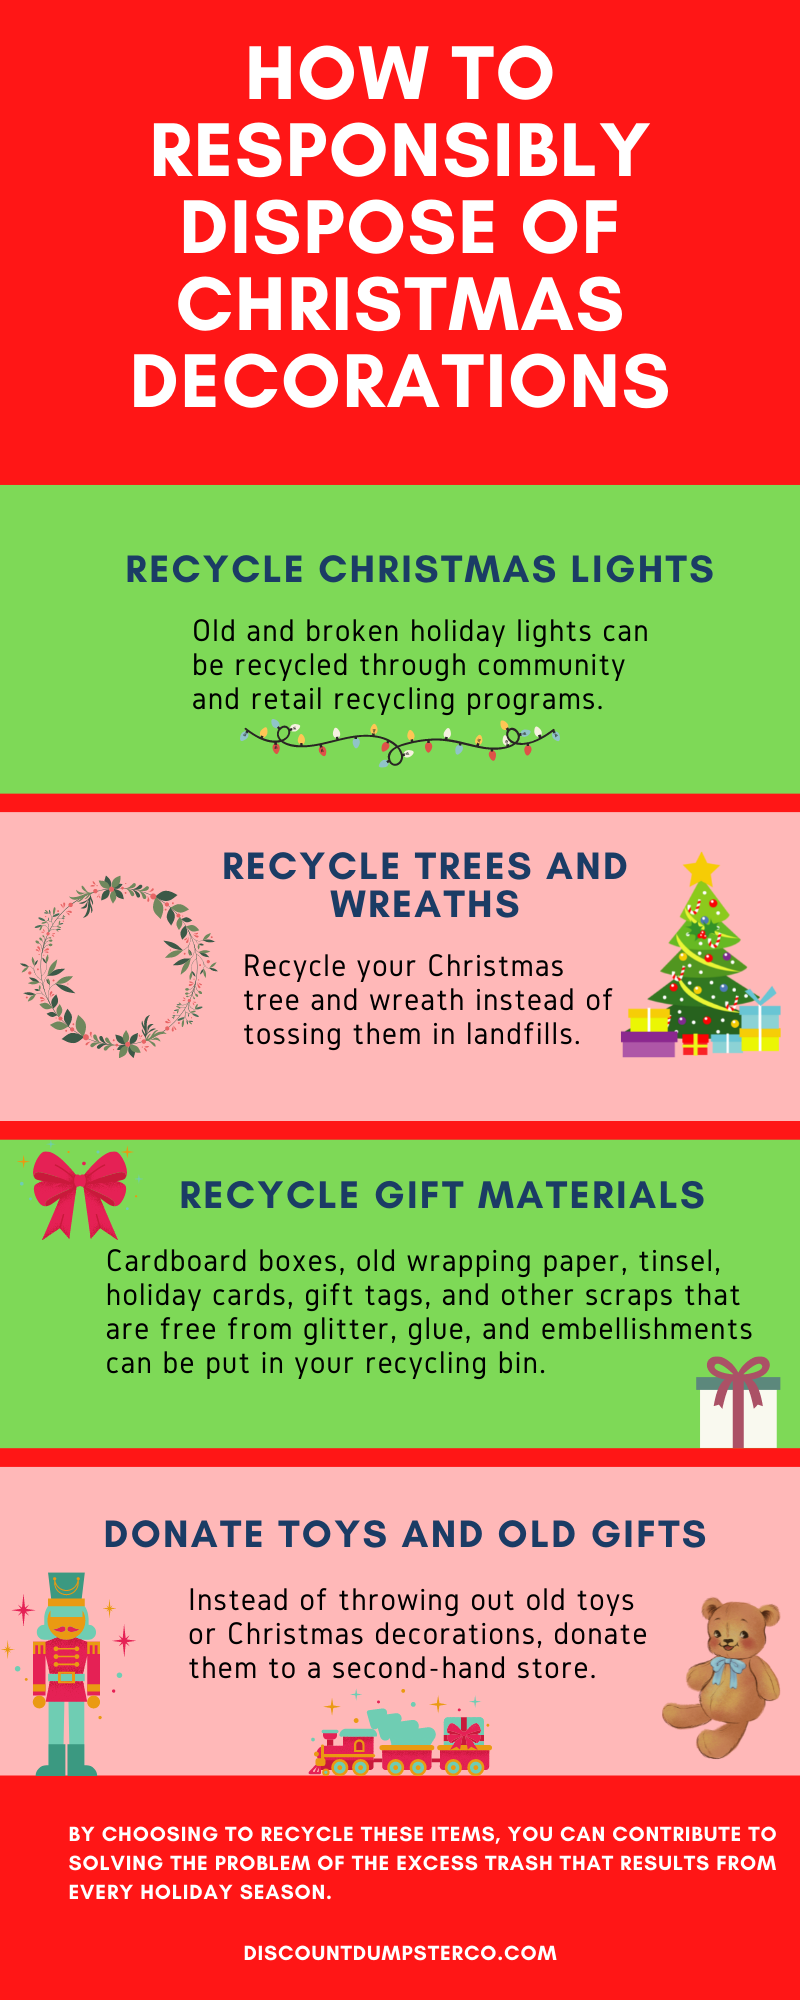 An infographic detailing how to responsibly dispose of old Christmas ornaments and materials